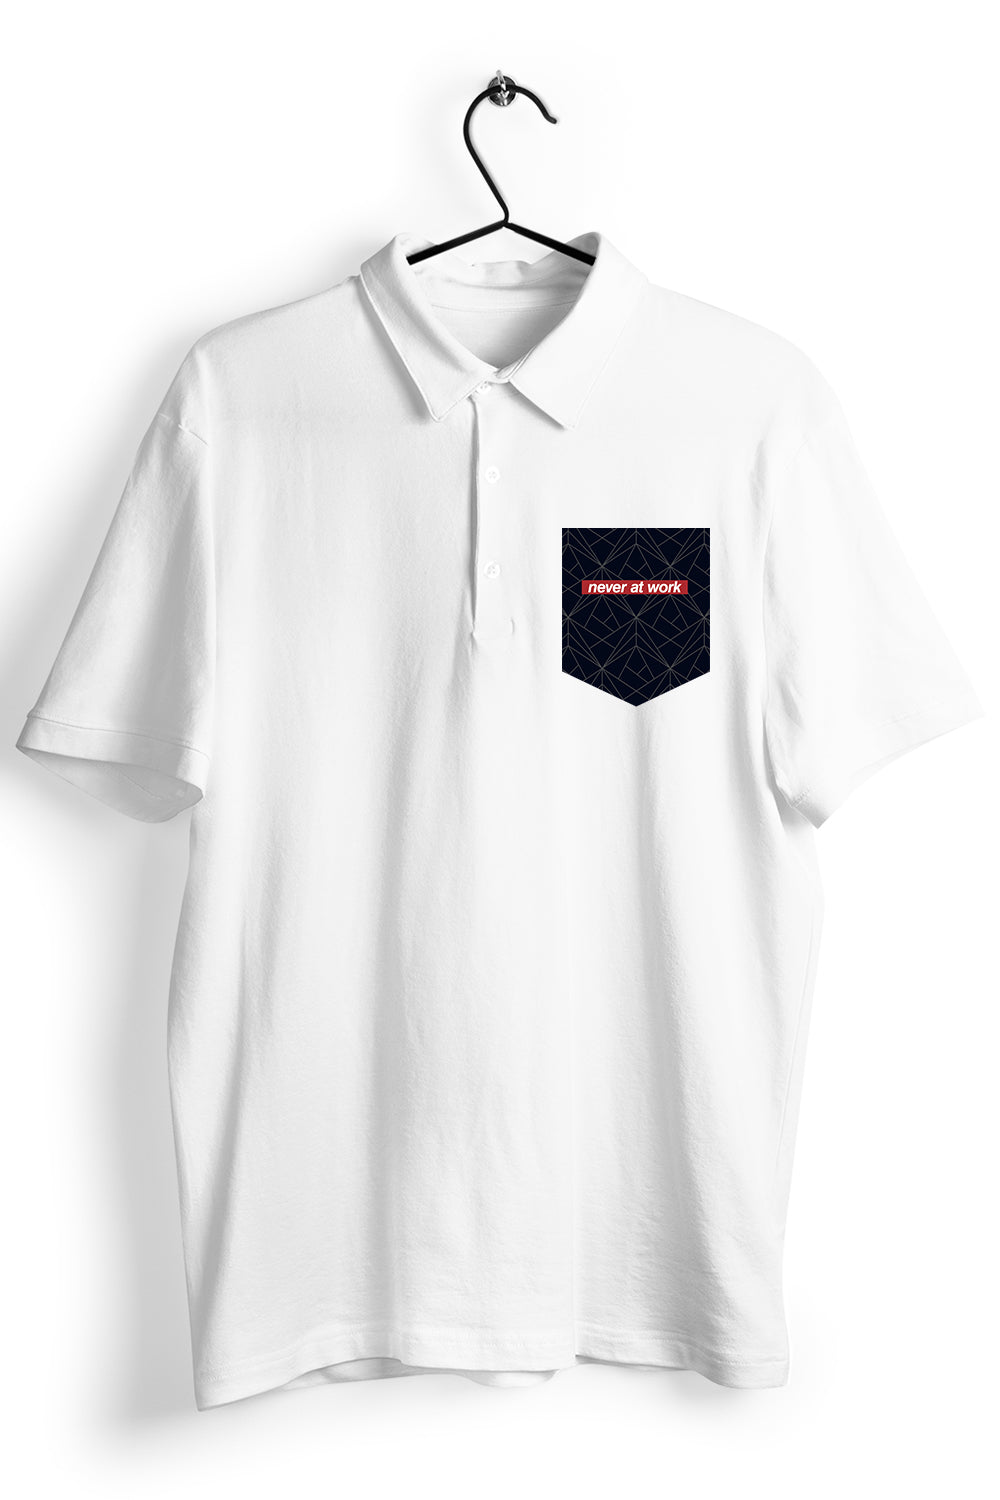 Never At Work Graphic Pocket Printed White Polo Shirt